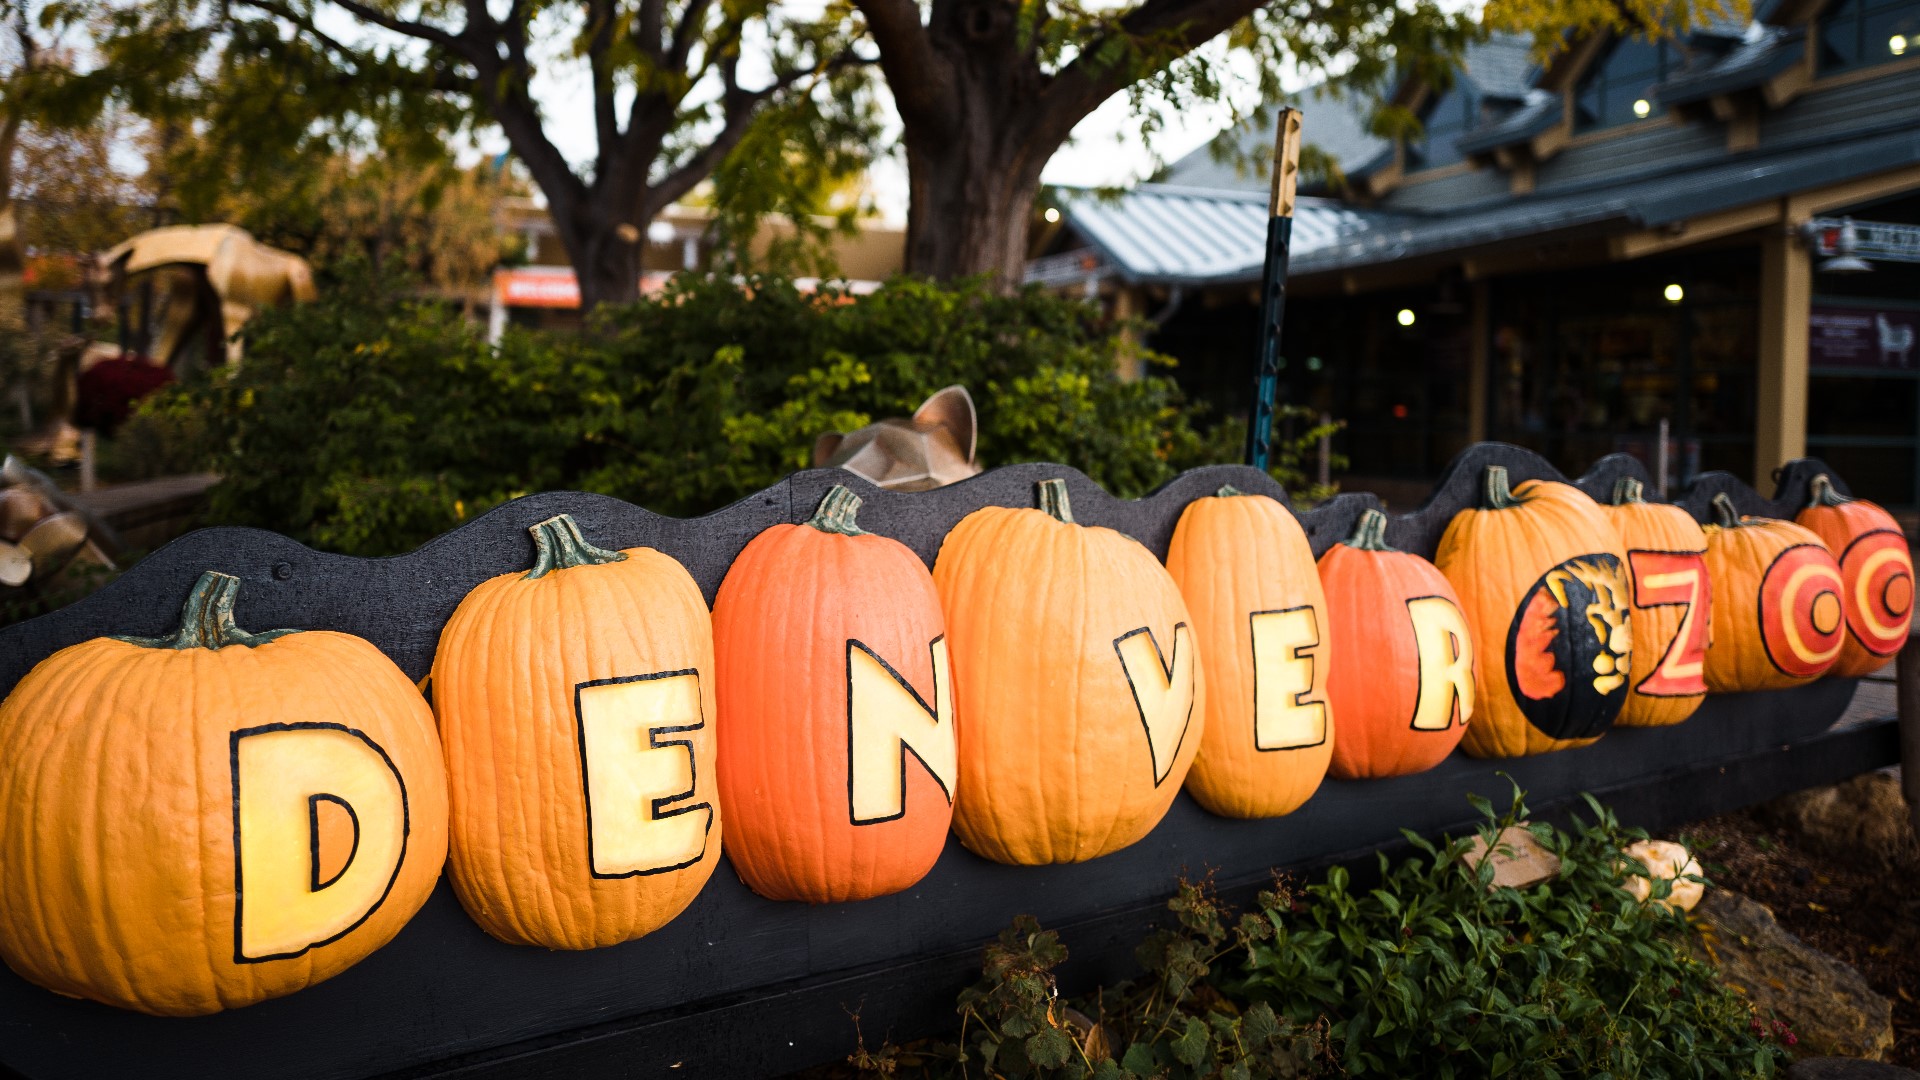 Denver Zoo is packed with “falloween” fun this year with several events planned throughout the month of October.